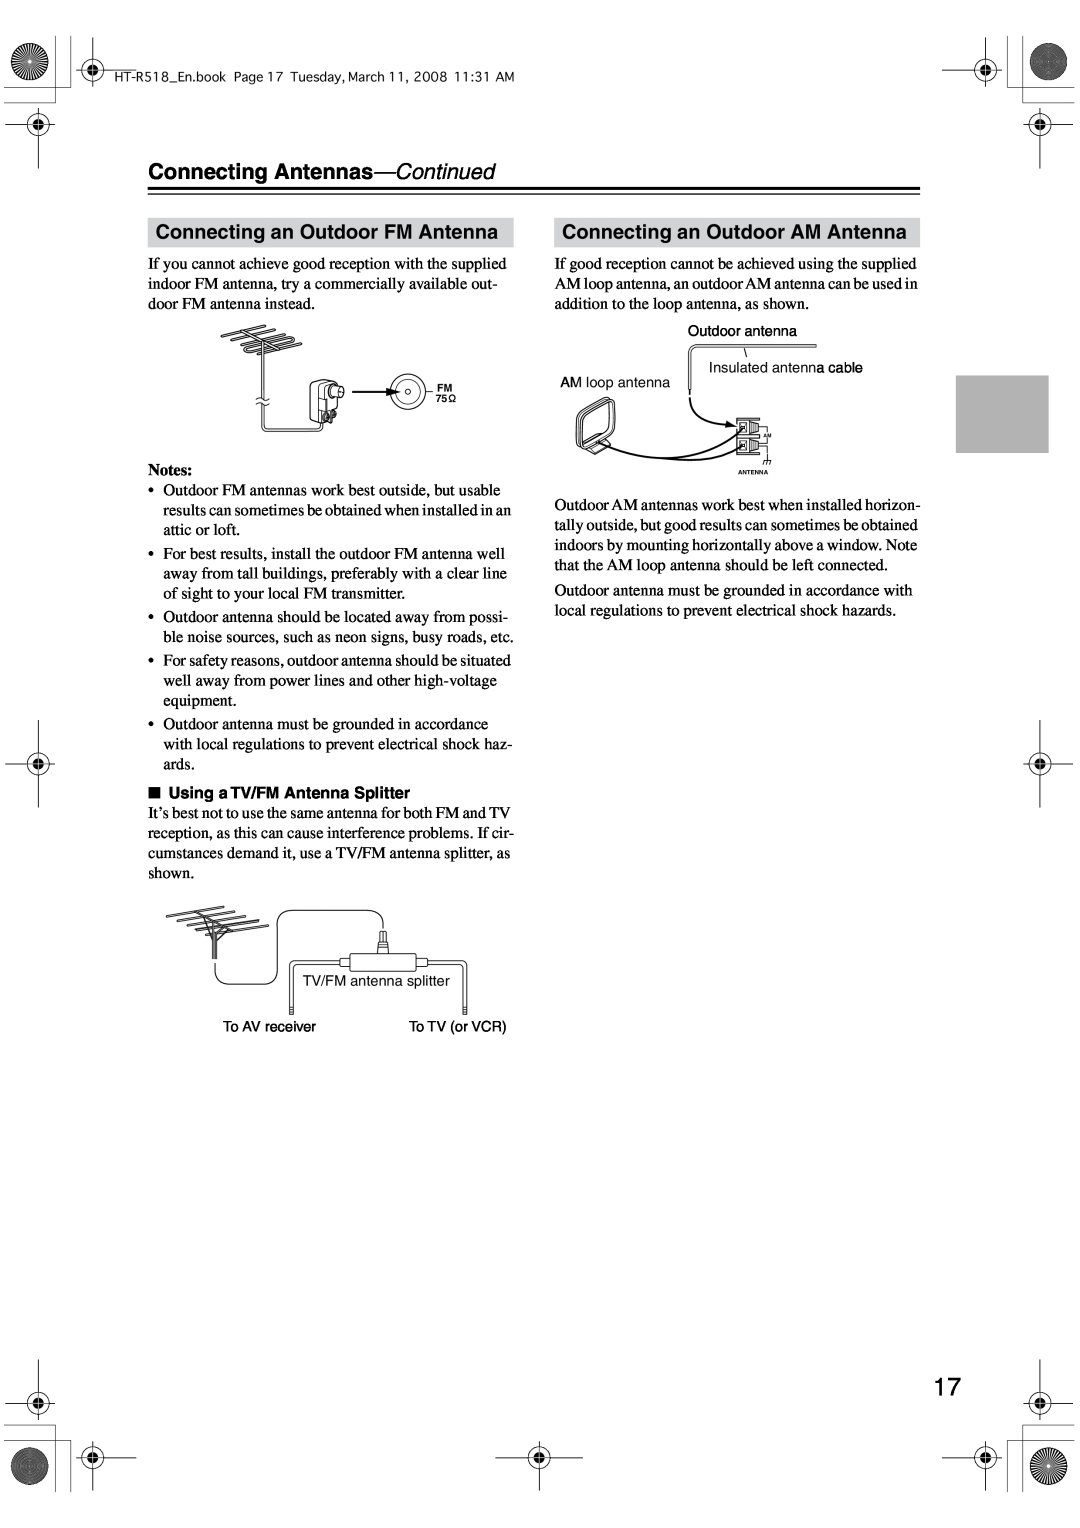 Onkyo HT-R518 Connecting Antennas-Continued, Connecting an Outdoor FM Antenna, Connecting an Outdoor AM Antenna 